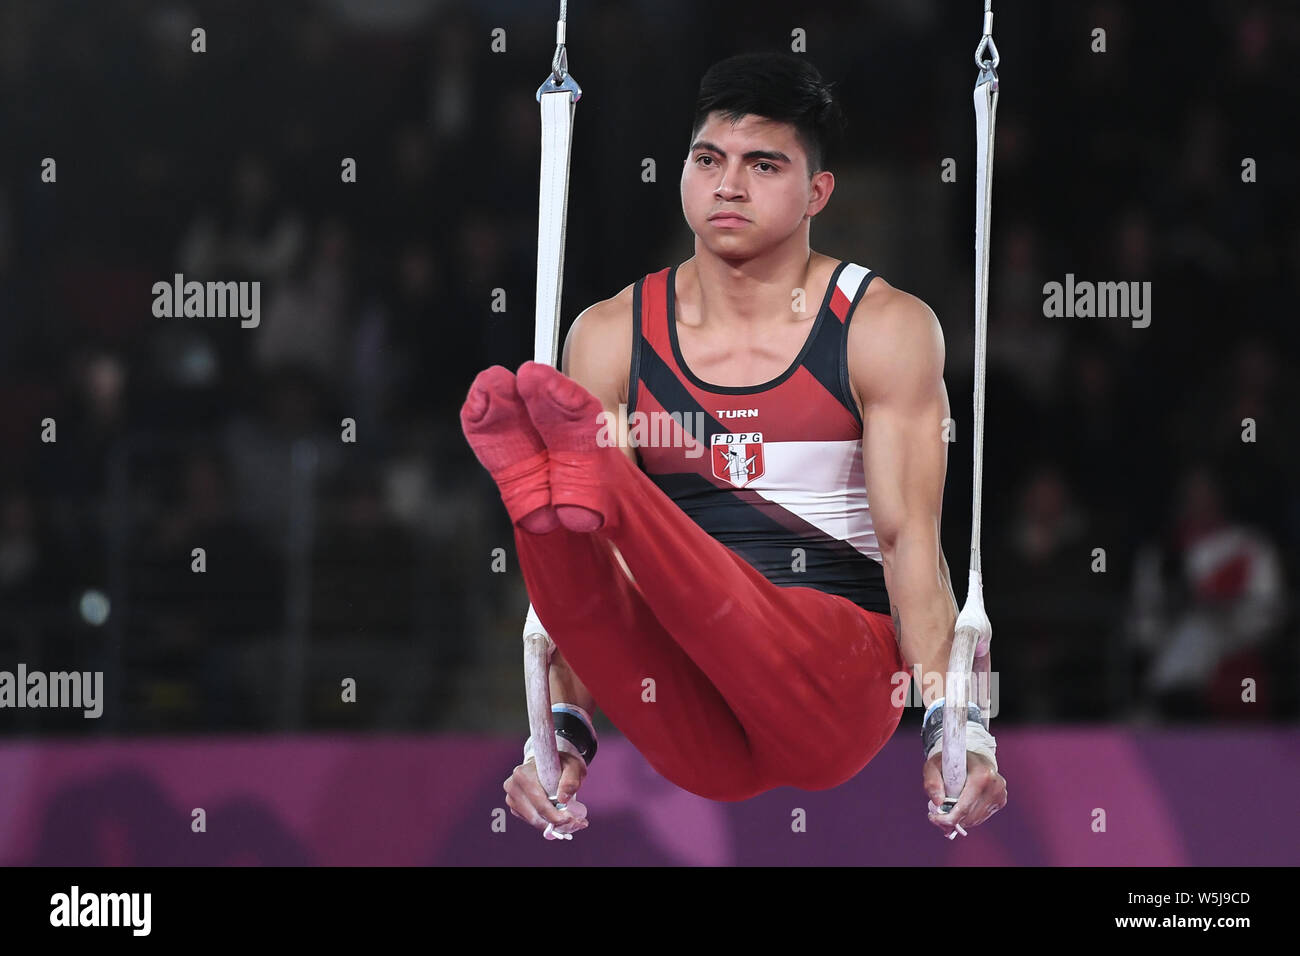 July 28, 2019, Lima, Peru: JESUS MORETO from Peru competes on the still rings during the team finals competition held in the Polideportivo Villa El Salvador in Lima, Peru. Credit: Amy Sanderson/ZUMA Wire/Alamy Live News Stock Photo